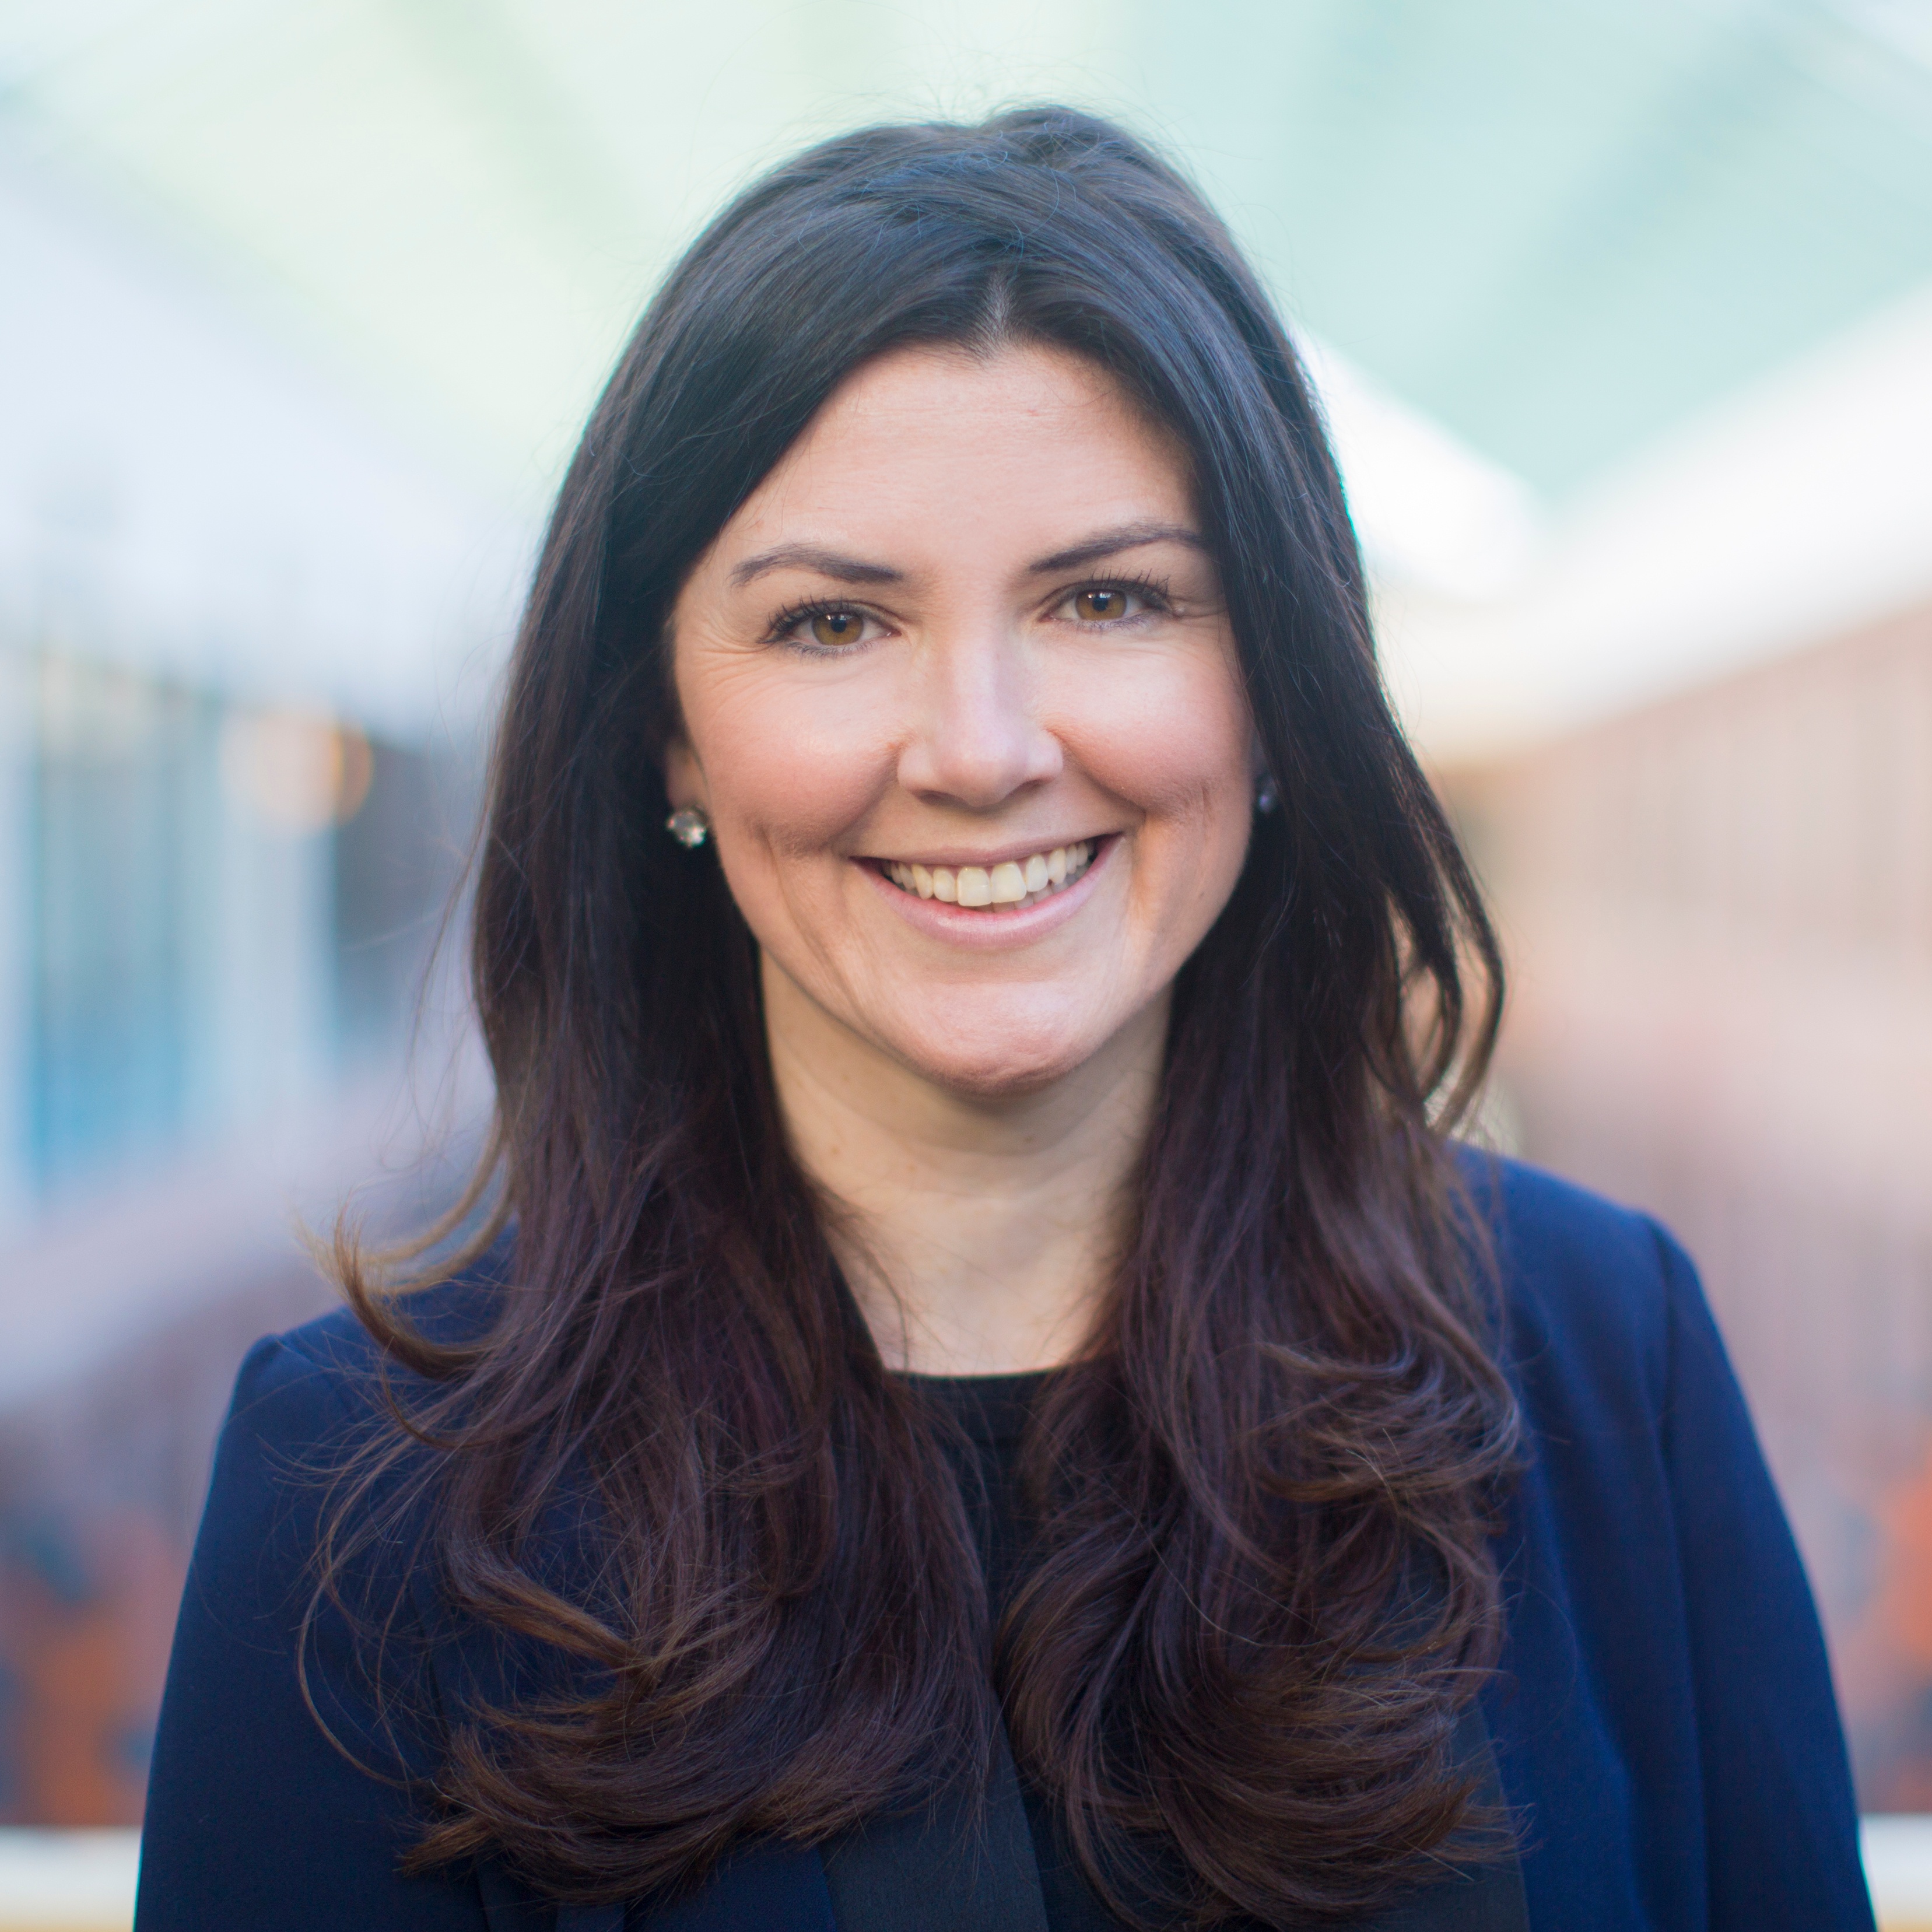 Katie Burke Becomes HubSpot’s Chief People Officer